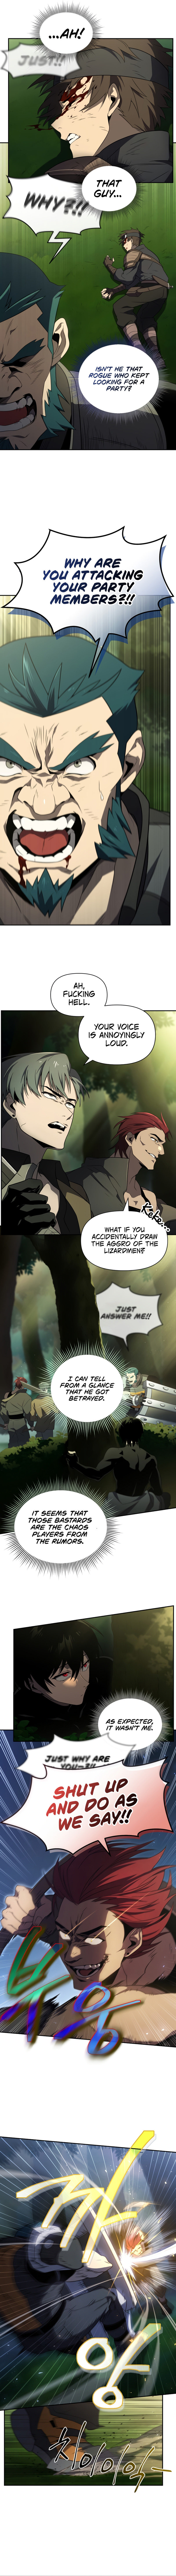 Player Who Returned 10,000 Years Later - Chapter 18 Page 5